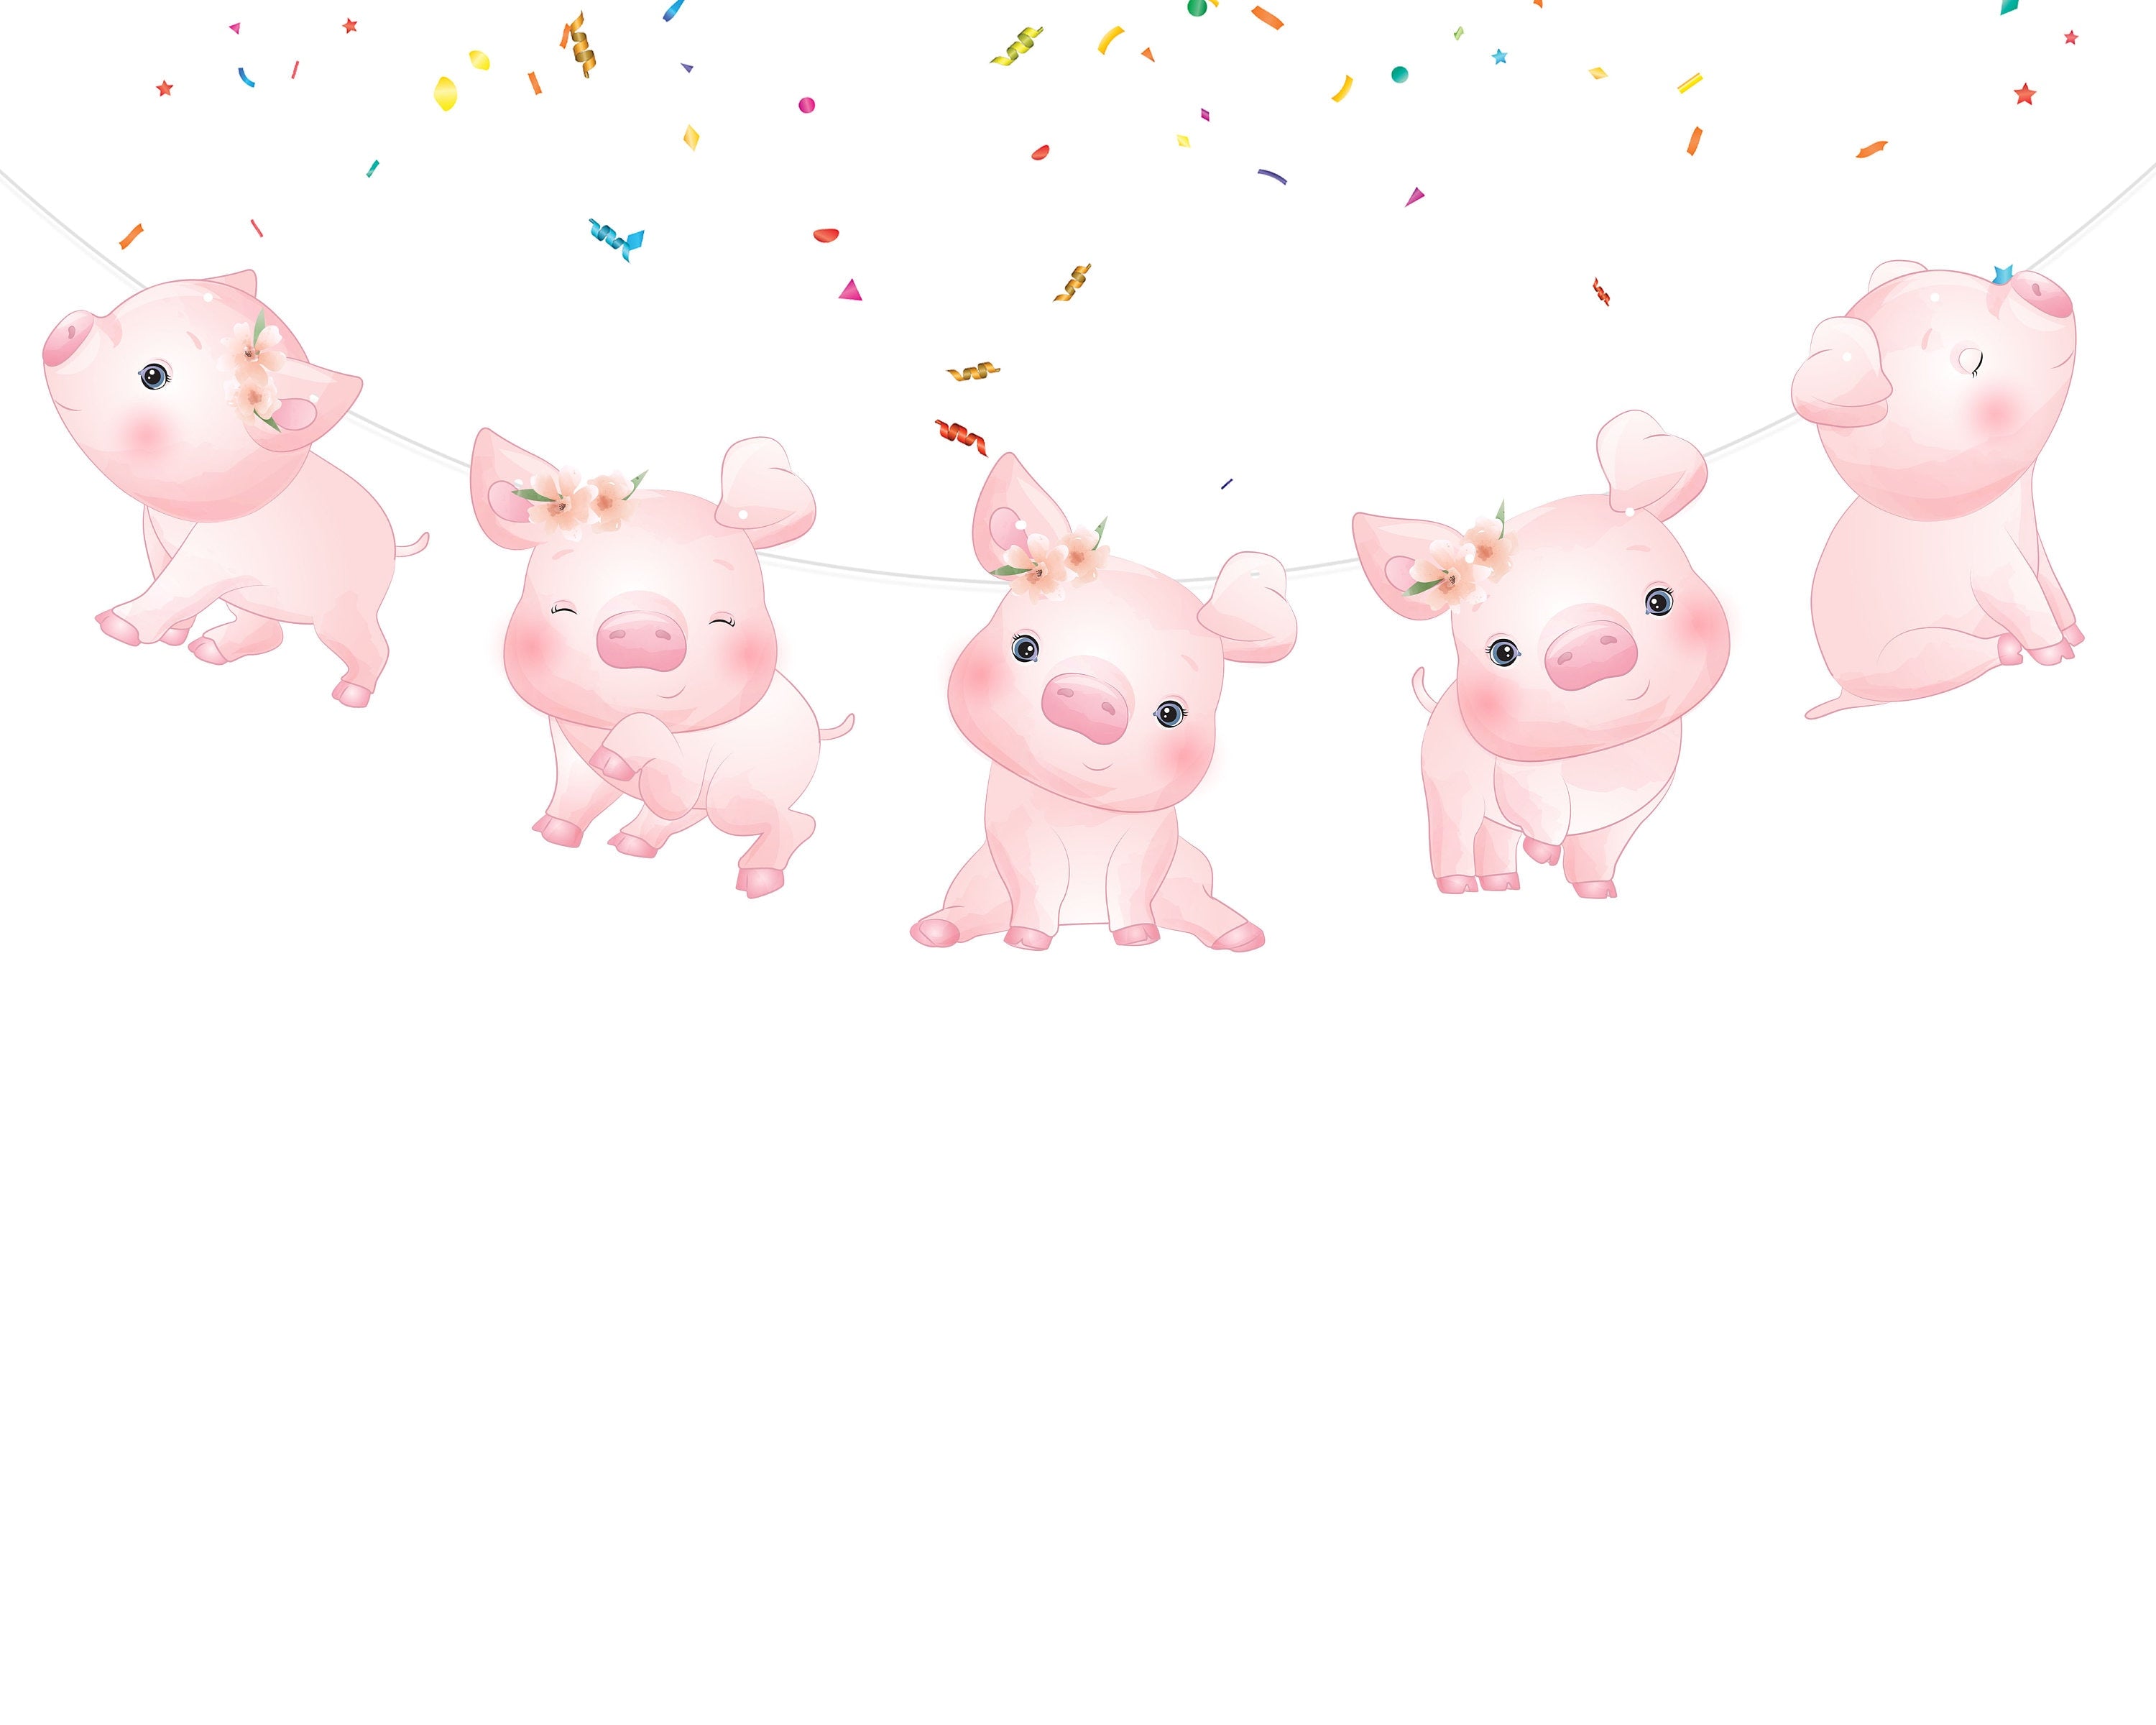 Adorable Pig Farm Cartoon Banner - Perfect for Nursery Decor and Birthday Parties